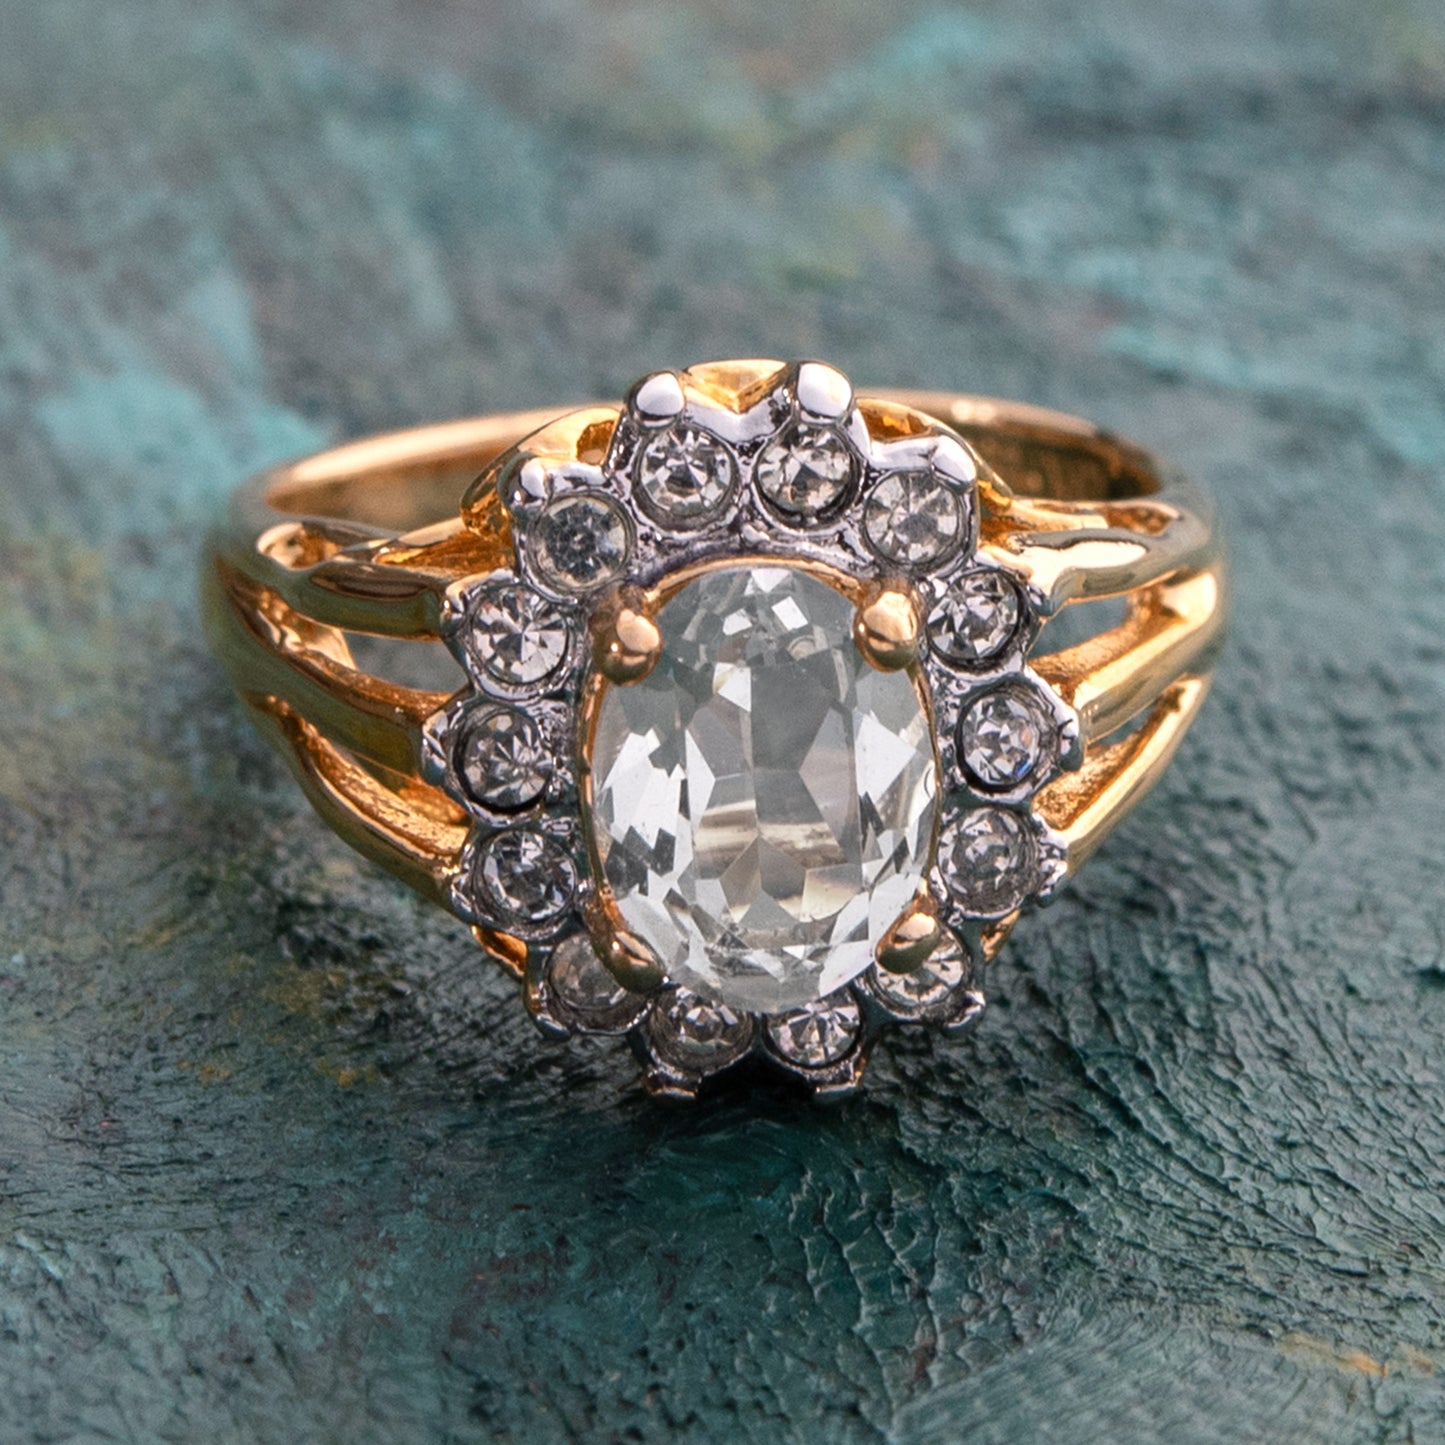 Vintage Jewelry Genuine Stone or Crystal Surrounded by Clear Austrian Crystals Ring Made in the USA